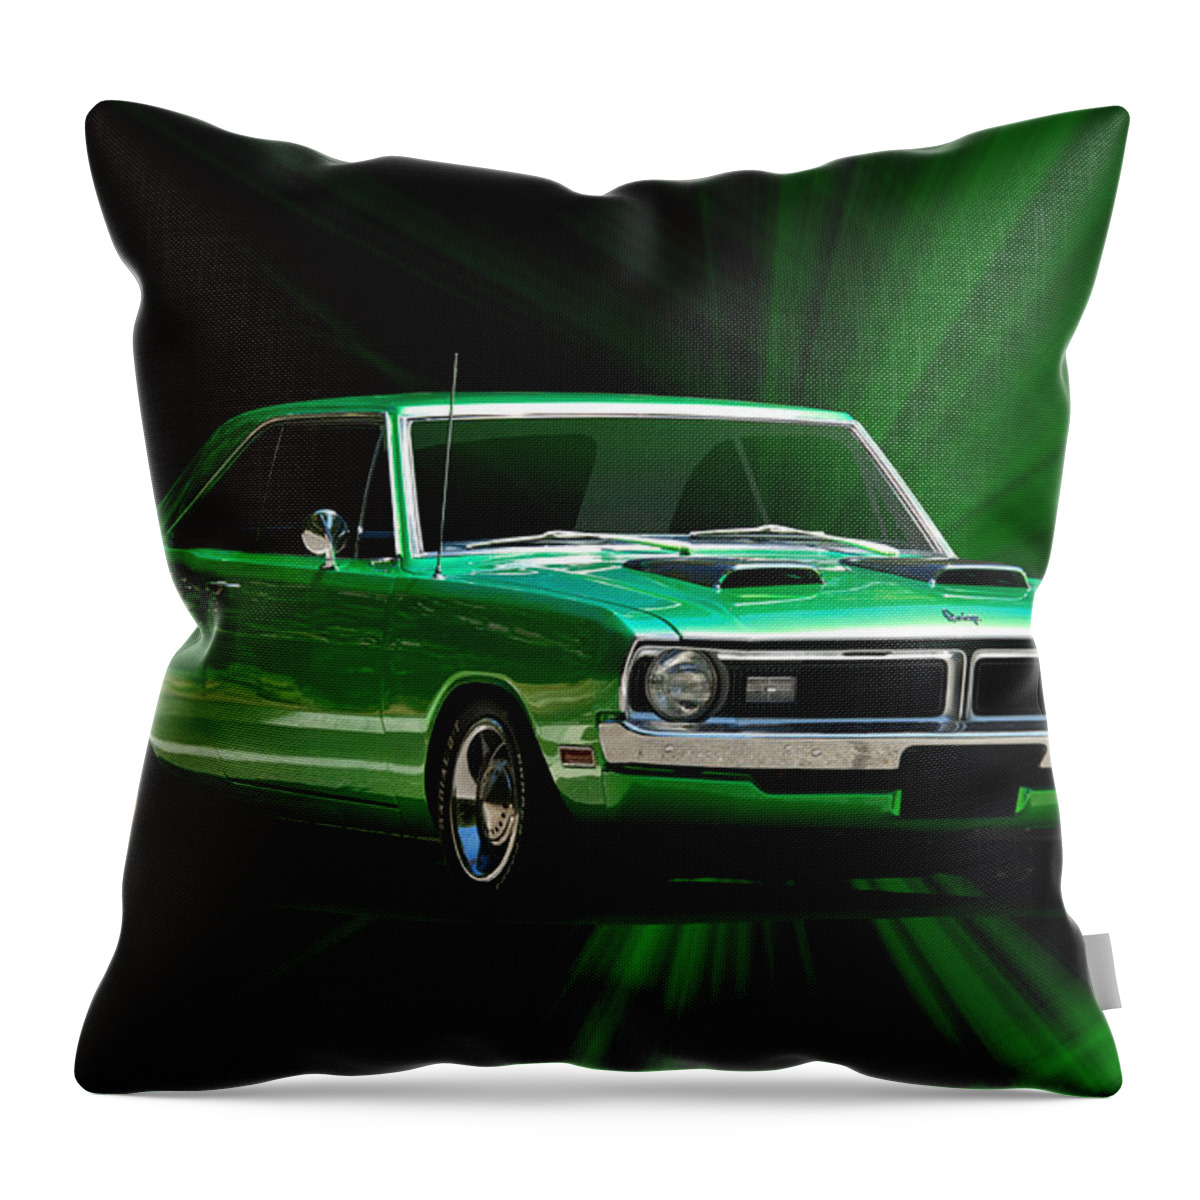 Alloy Throw Pillow featuring the photograph 1970 Dodge Dart Swinger by Dave Koontz